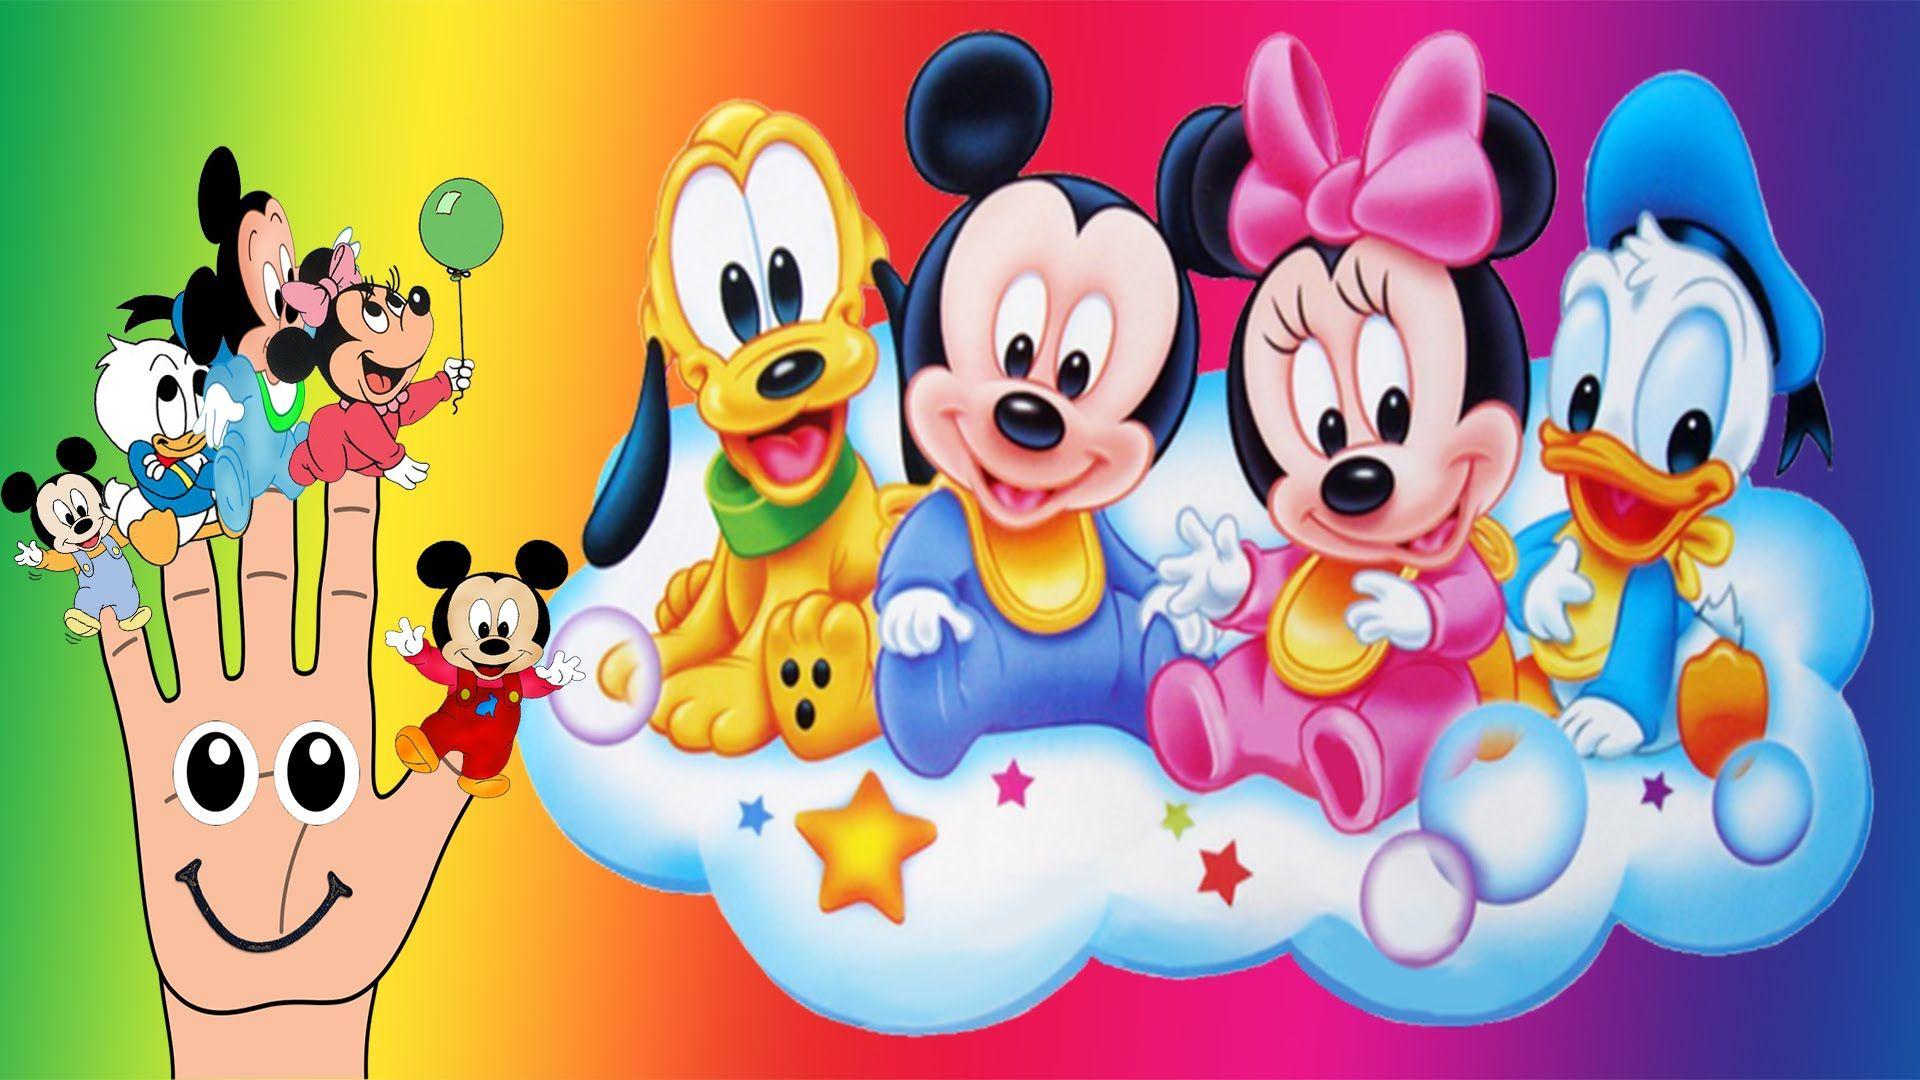 Baby Mickey Mouse Wallpapers Top Free Baby Mickey Mouse Backgrounds Wallpaperaccess